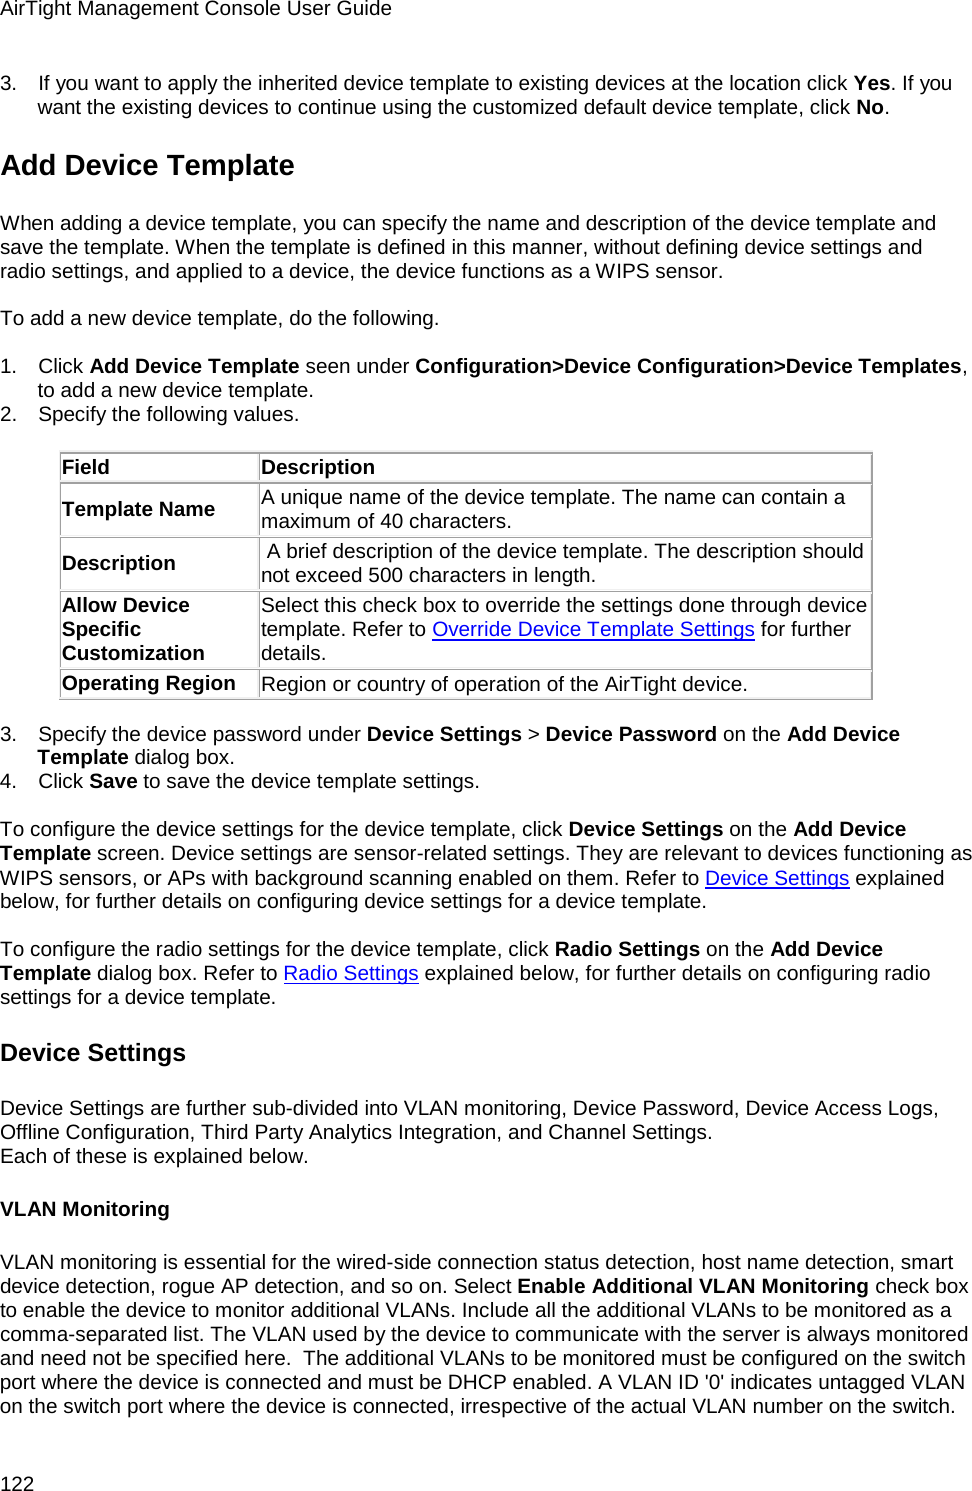 AirTight Management Console User Guide 122 3.      If you want to apply the inherited device template to existing devices at the location click Yes. If you want the existing devices to continue using the customized default device template, click No. Add Device Template When adding a device template, you can specify the name and description of the device template and save the template. When the template is defined in this manner, without defining device settings and radio settings, and applied to a device, the device functions as a WIPS sensor.   To add a new device template, do the following.   1.      Click Add Device Template seen under Configuration&gt;Device Configuration&gt;Device Templates, to add a new device template. 2.      Specify the following values.   Field Description Template Name A unique name of the device template. The name can contain a maximum of 40 characters.  Description  A brief description of the device template. The description should not exceed 500 characters in length. Allow Device Specific Customization Select this check box to override the settings done through device template. Refer to Override Device Template Settings for further details. Operating Region Region or country of operation of the AirTight device.   3.      Specify the device password under Device Settings &gt; Device Password on the Add Device Template dialog box. 4.      Click Save to save the device template settings.   To configure the device settings for the device template, click Device Settings on the Add Device Template screen. Device settings are sensor-related settings. They are relevant to devices functioning as WIPS sensors, or APs with background scanning enabled on them. Refer to Device Settings explained below, for further details on configuring device settings for a device template.   To configure the radio settings for the device template, click Radio Settings on the Add Device Template dialog box. Refer to Radio Settings explained below, for further details on configuring radio settings for a device template. Device Settings Device Settings are further sub-divided into VLAN monitoring, Device Password, Device Access Logs, Offline Configuration, Third Party Analytics Integration, and Channel Settings. Each of these is explained below.  VLAN Monitoring VLAN monitoring is essential for the wired-side connection status detection, host name detection, smart device detection, rogue AP detection, and so on. Select Enable Additional VLAN Monitoring check box to enable the device to monitor additional VLANs. Include all the additional VLANs to be monitored as a comma-separated list. The VLAN used by the device to communicate with the server is always monitored and need not be specified here.  The additional VLANs to be monitored must be configured on the switch port where the device is connected and must be DHCP enabled. A VLAN ID &apos;0&apos; indicates untagged VLAN on the switch port where the device is connected, irrespective of the actual VLAN number on the switch.  